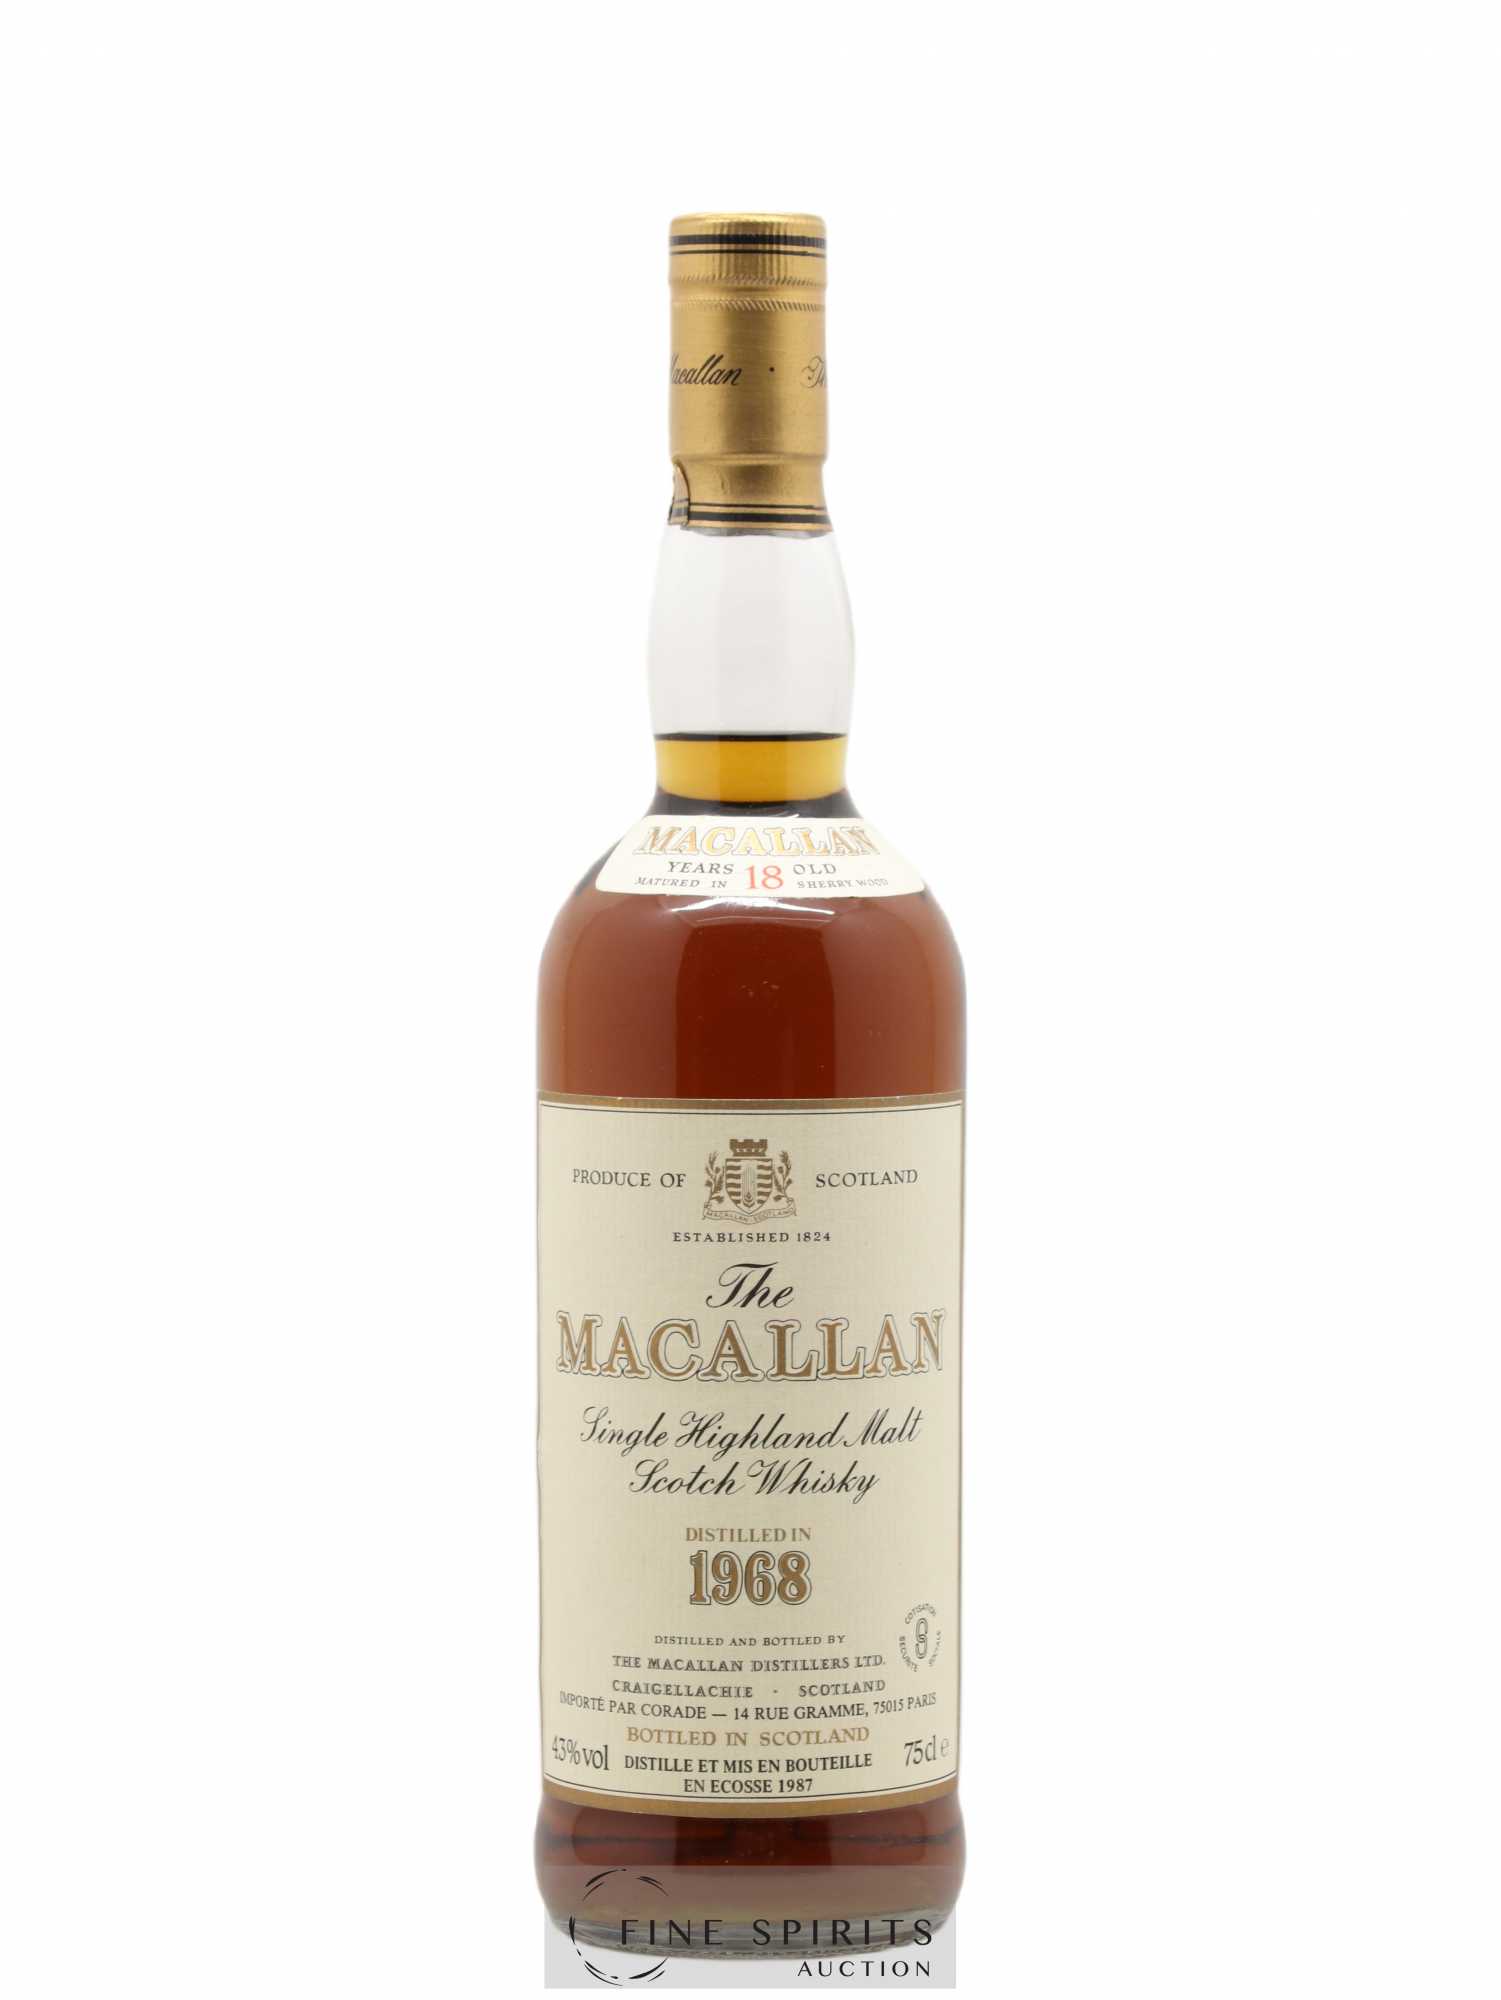 Macallan (The) 18 years 1968 Of. Sherry Wood Matured - bottled 1987 Corade Import